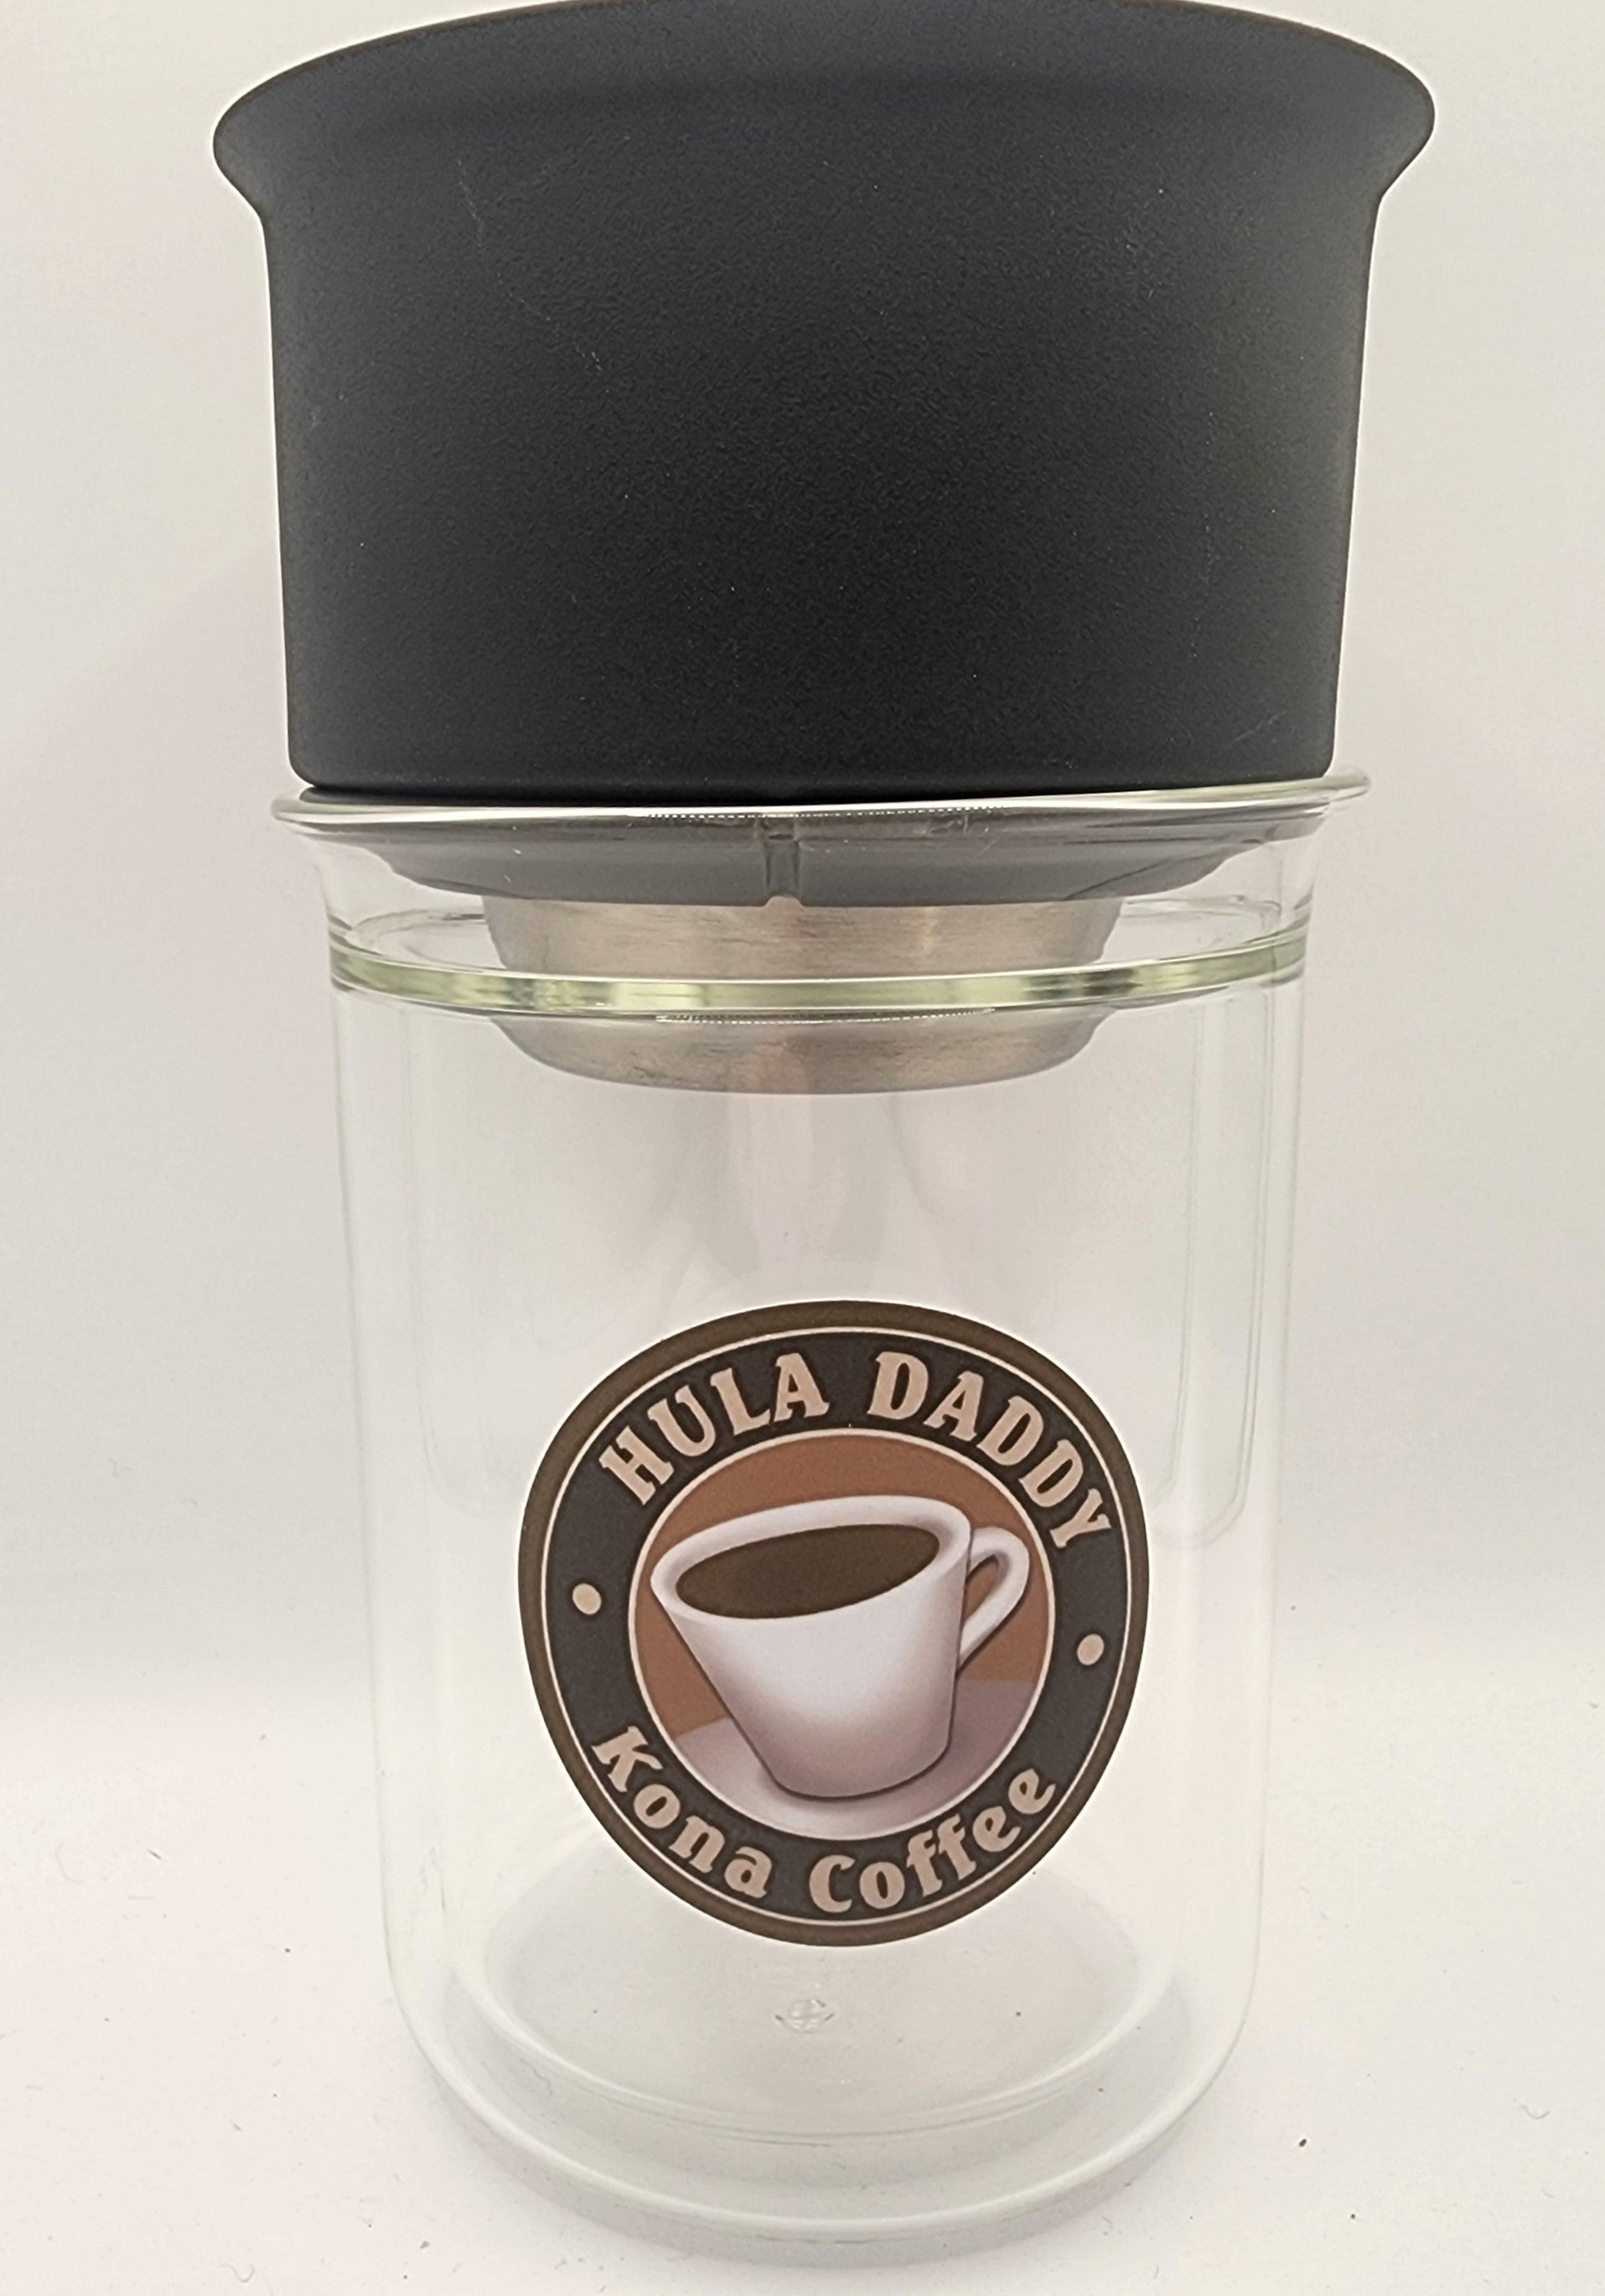 Hula Daddy Pour Over Brewer 8 0z